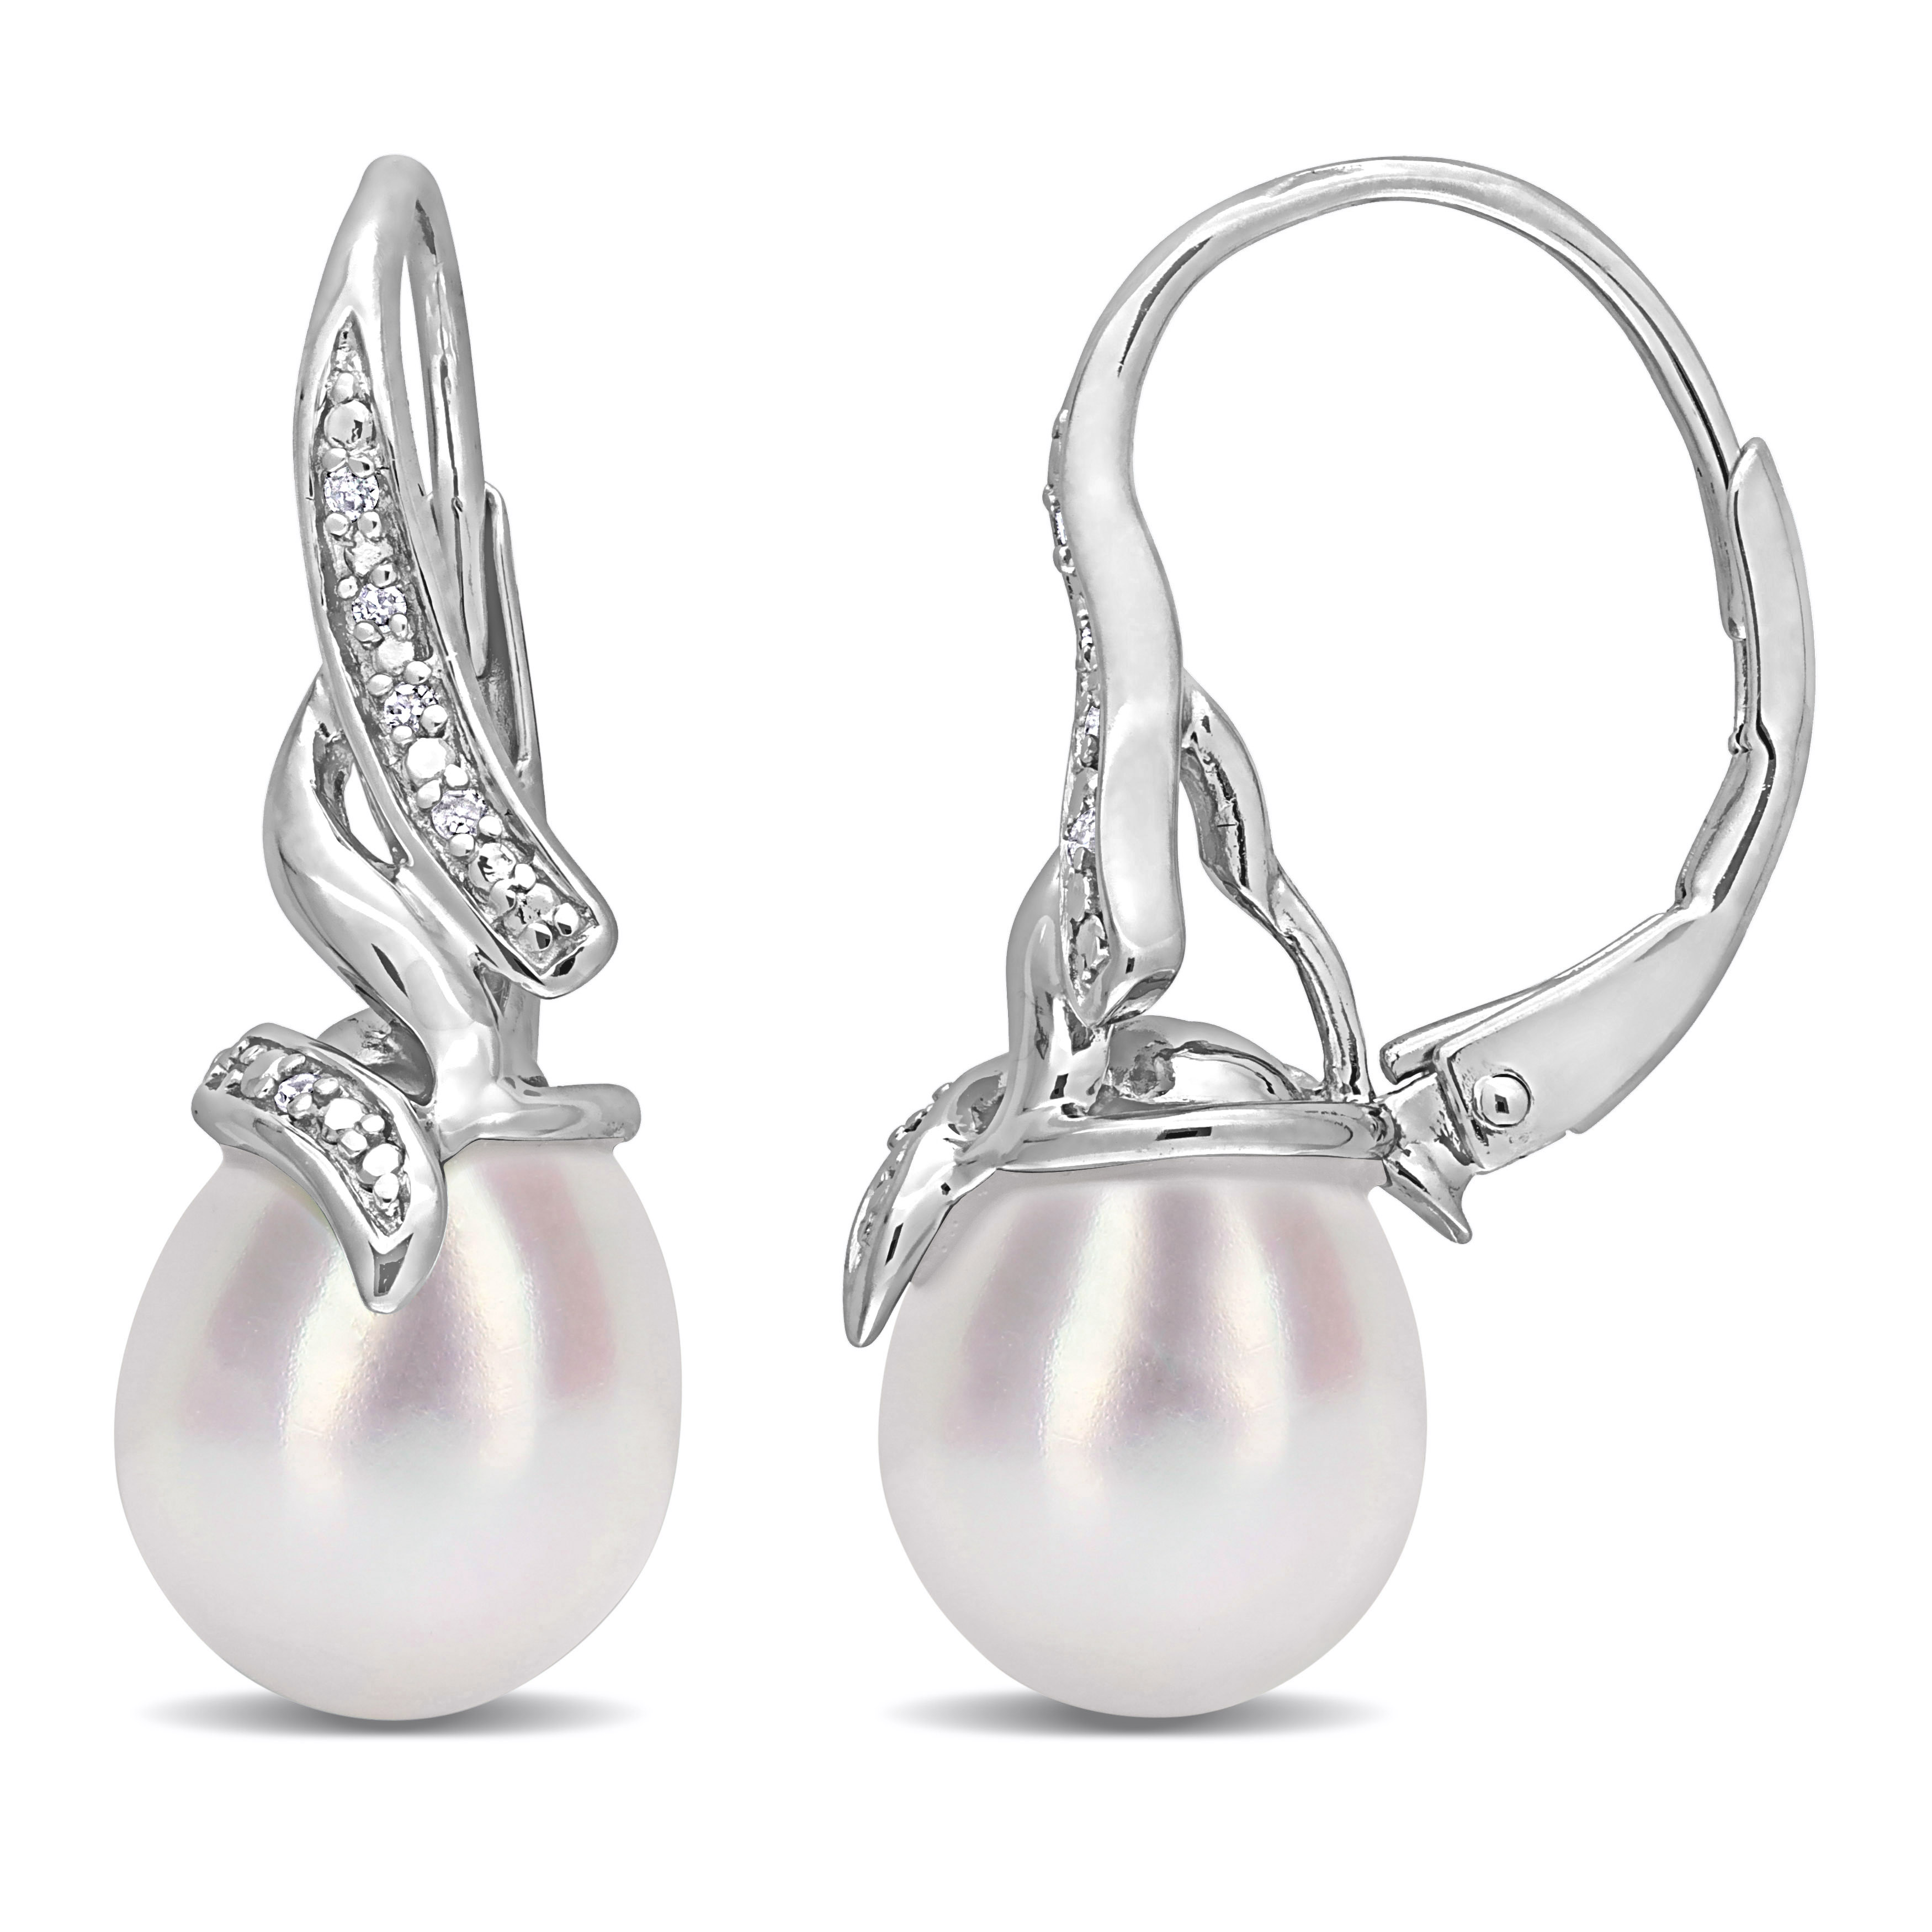 9 - 9.5 MM White Cultured Freshwater Pearl and Diamond Twist Leverback Drop Earrings in Sterling Silver